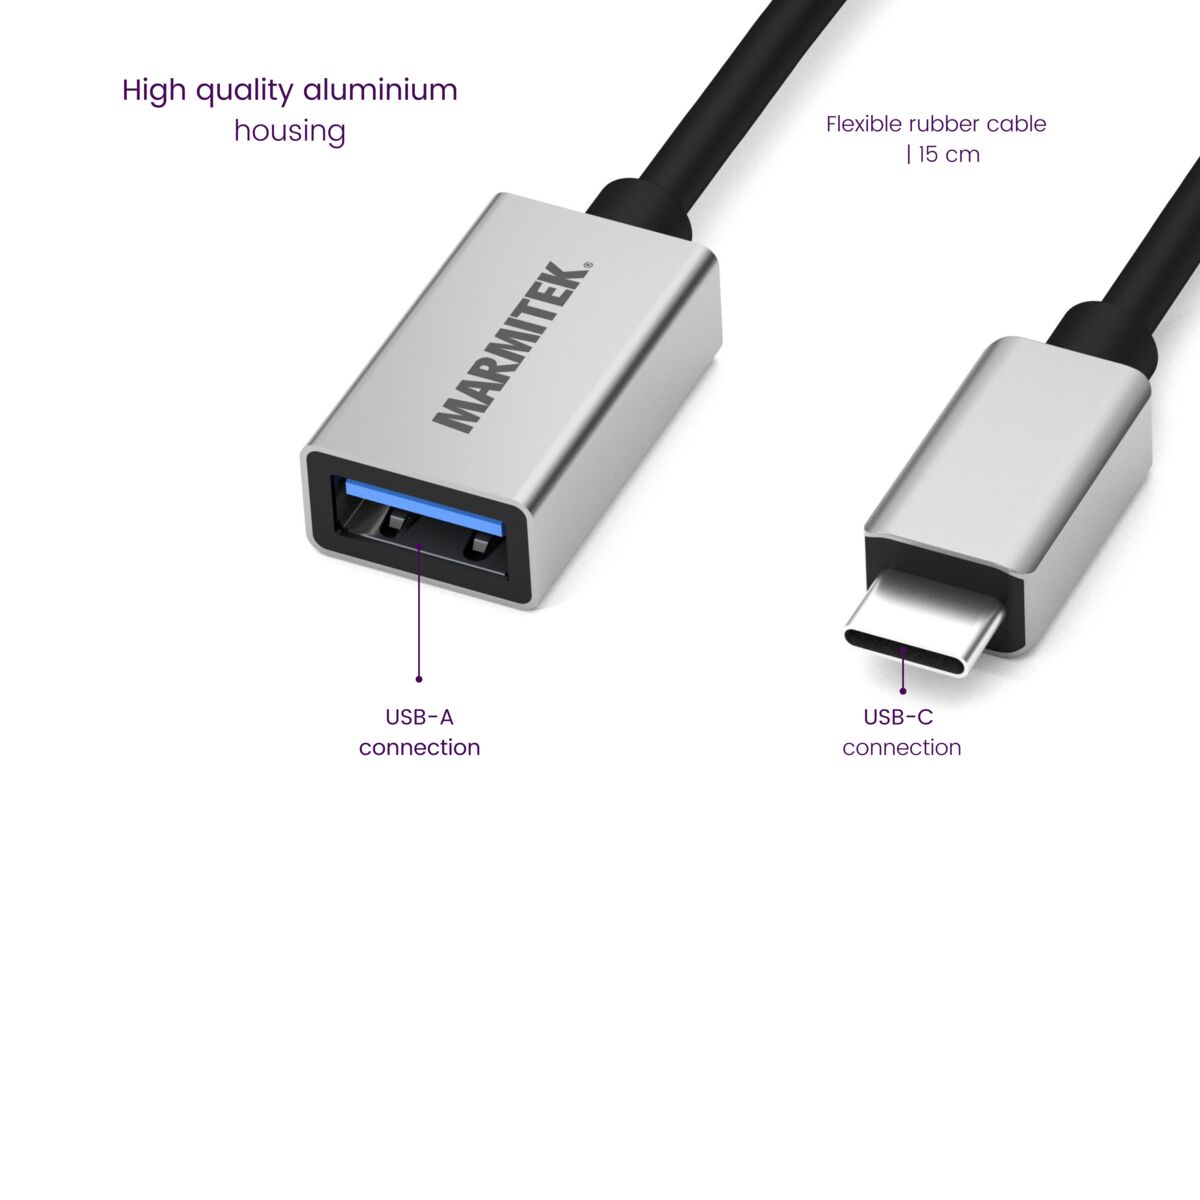 Connect USB C > USB-A - USB-C to USB-A adapter